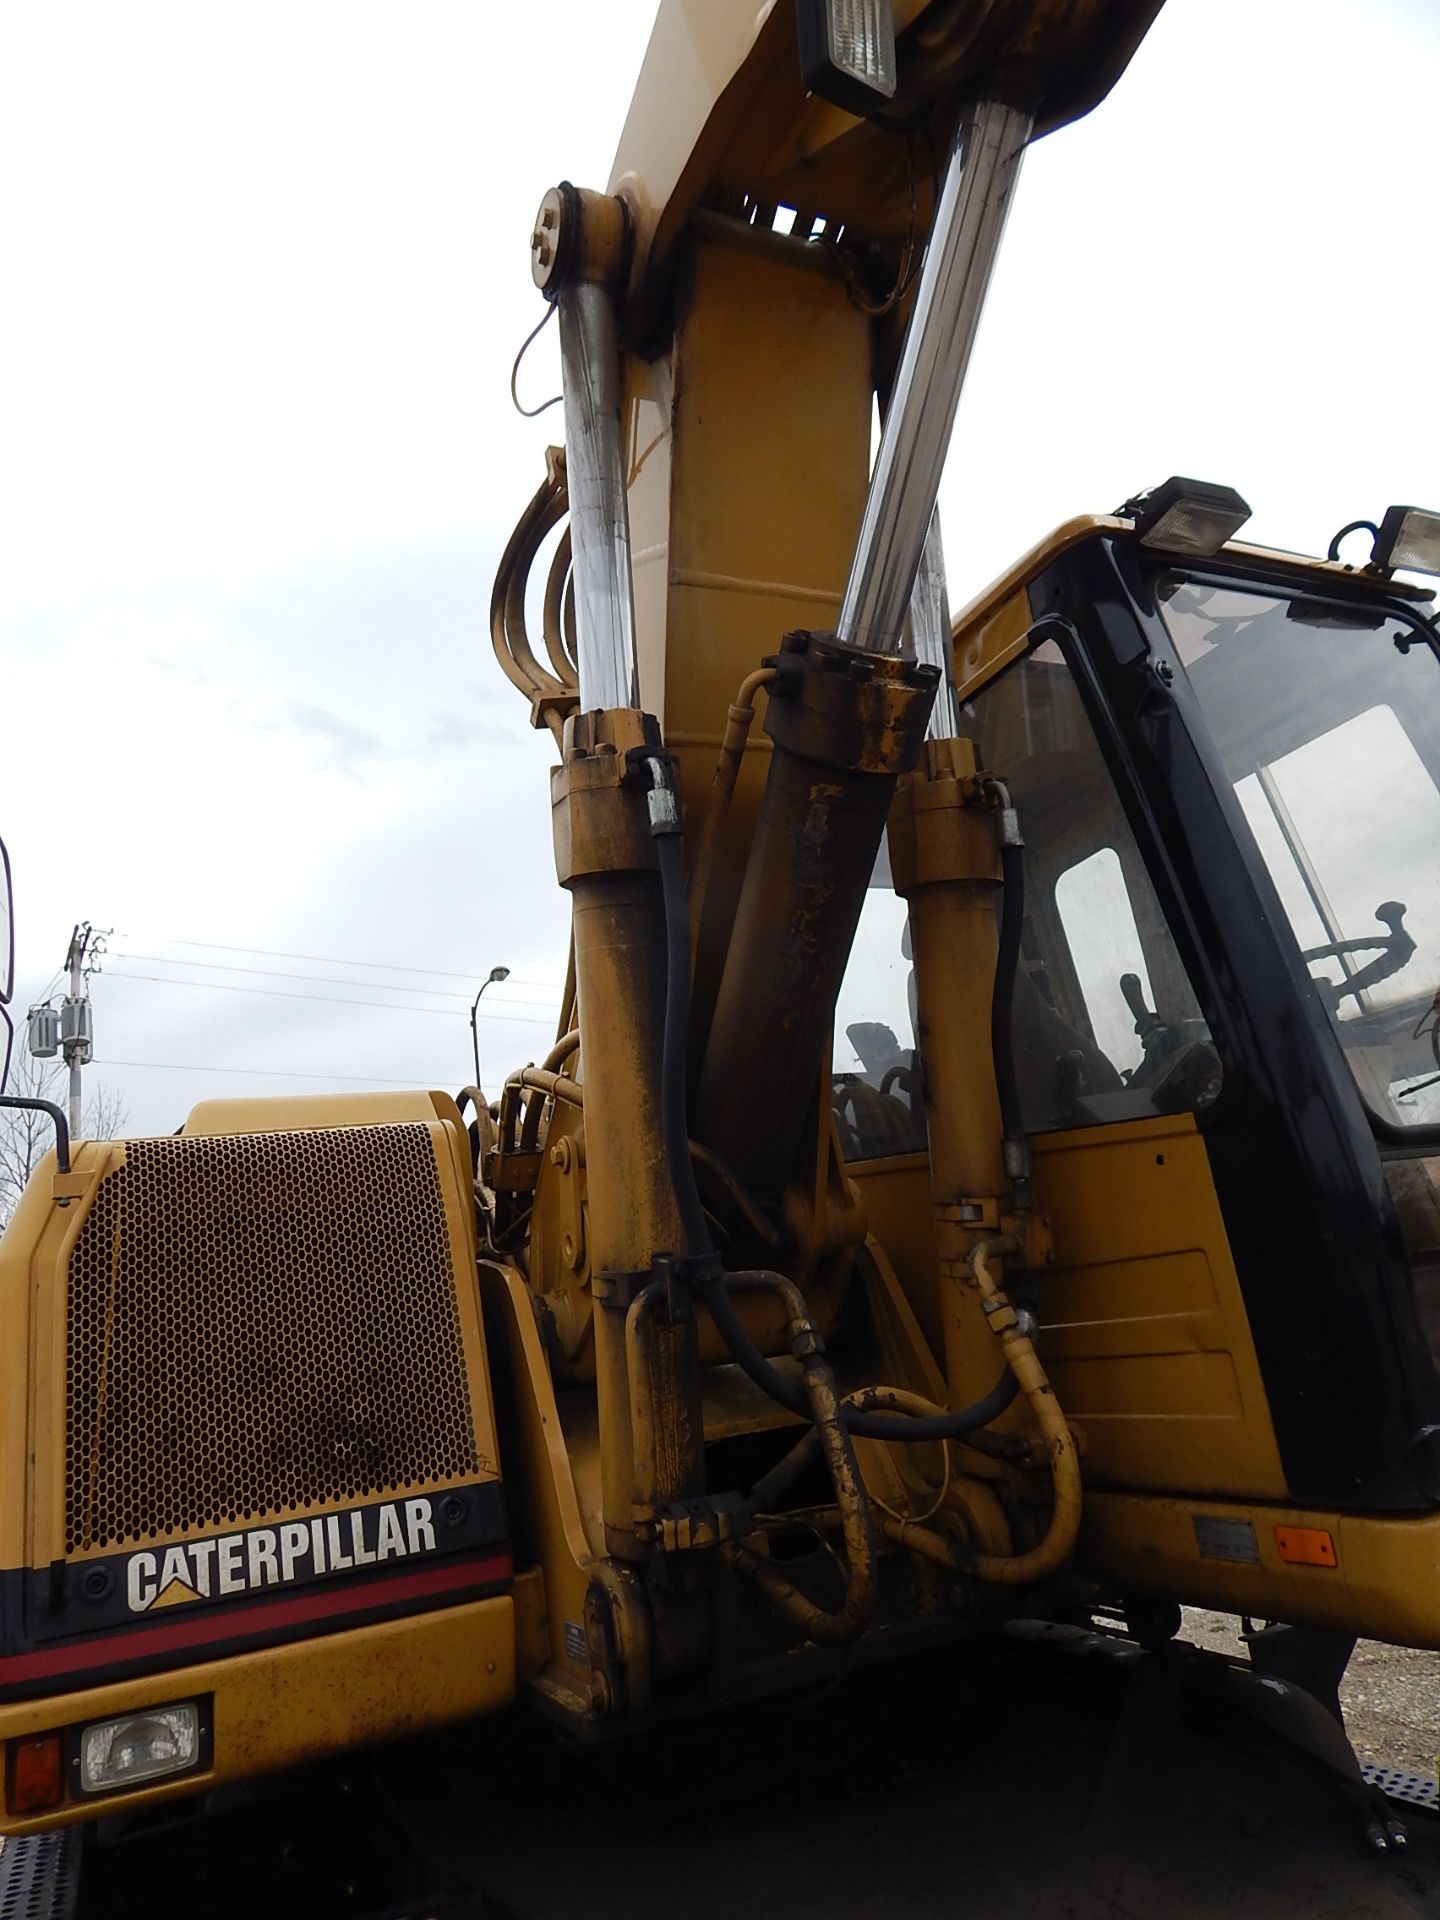 2000 Caterpillar Model M320 Mobile Excavator SN 06WL00508, (4) Outriggers, Dual Tires, Enclosed Cab, - Image 15 of 27